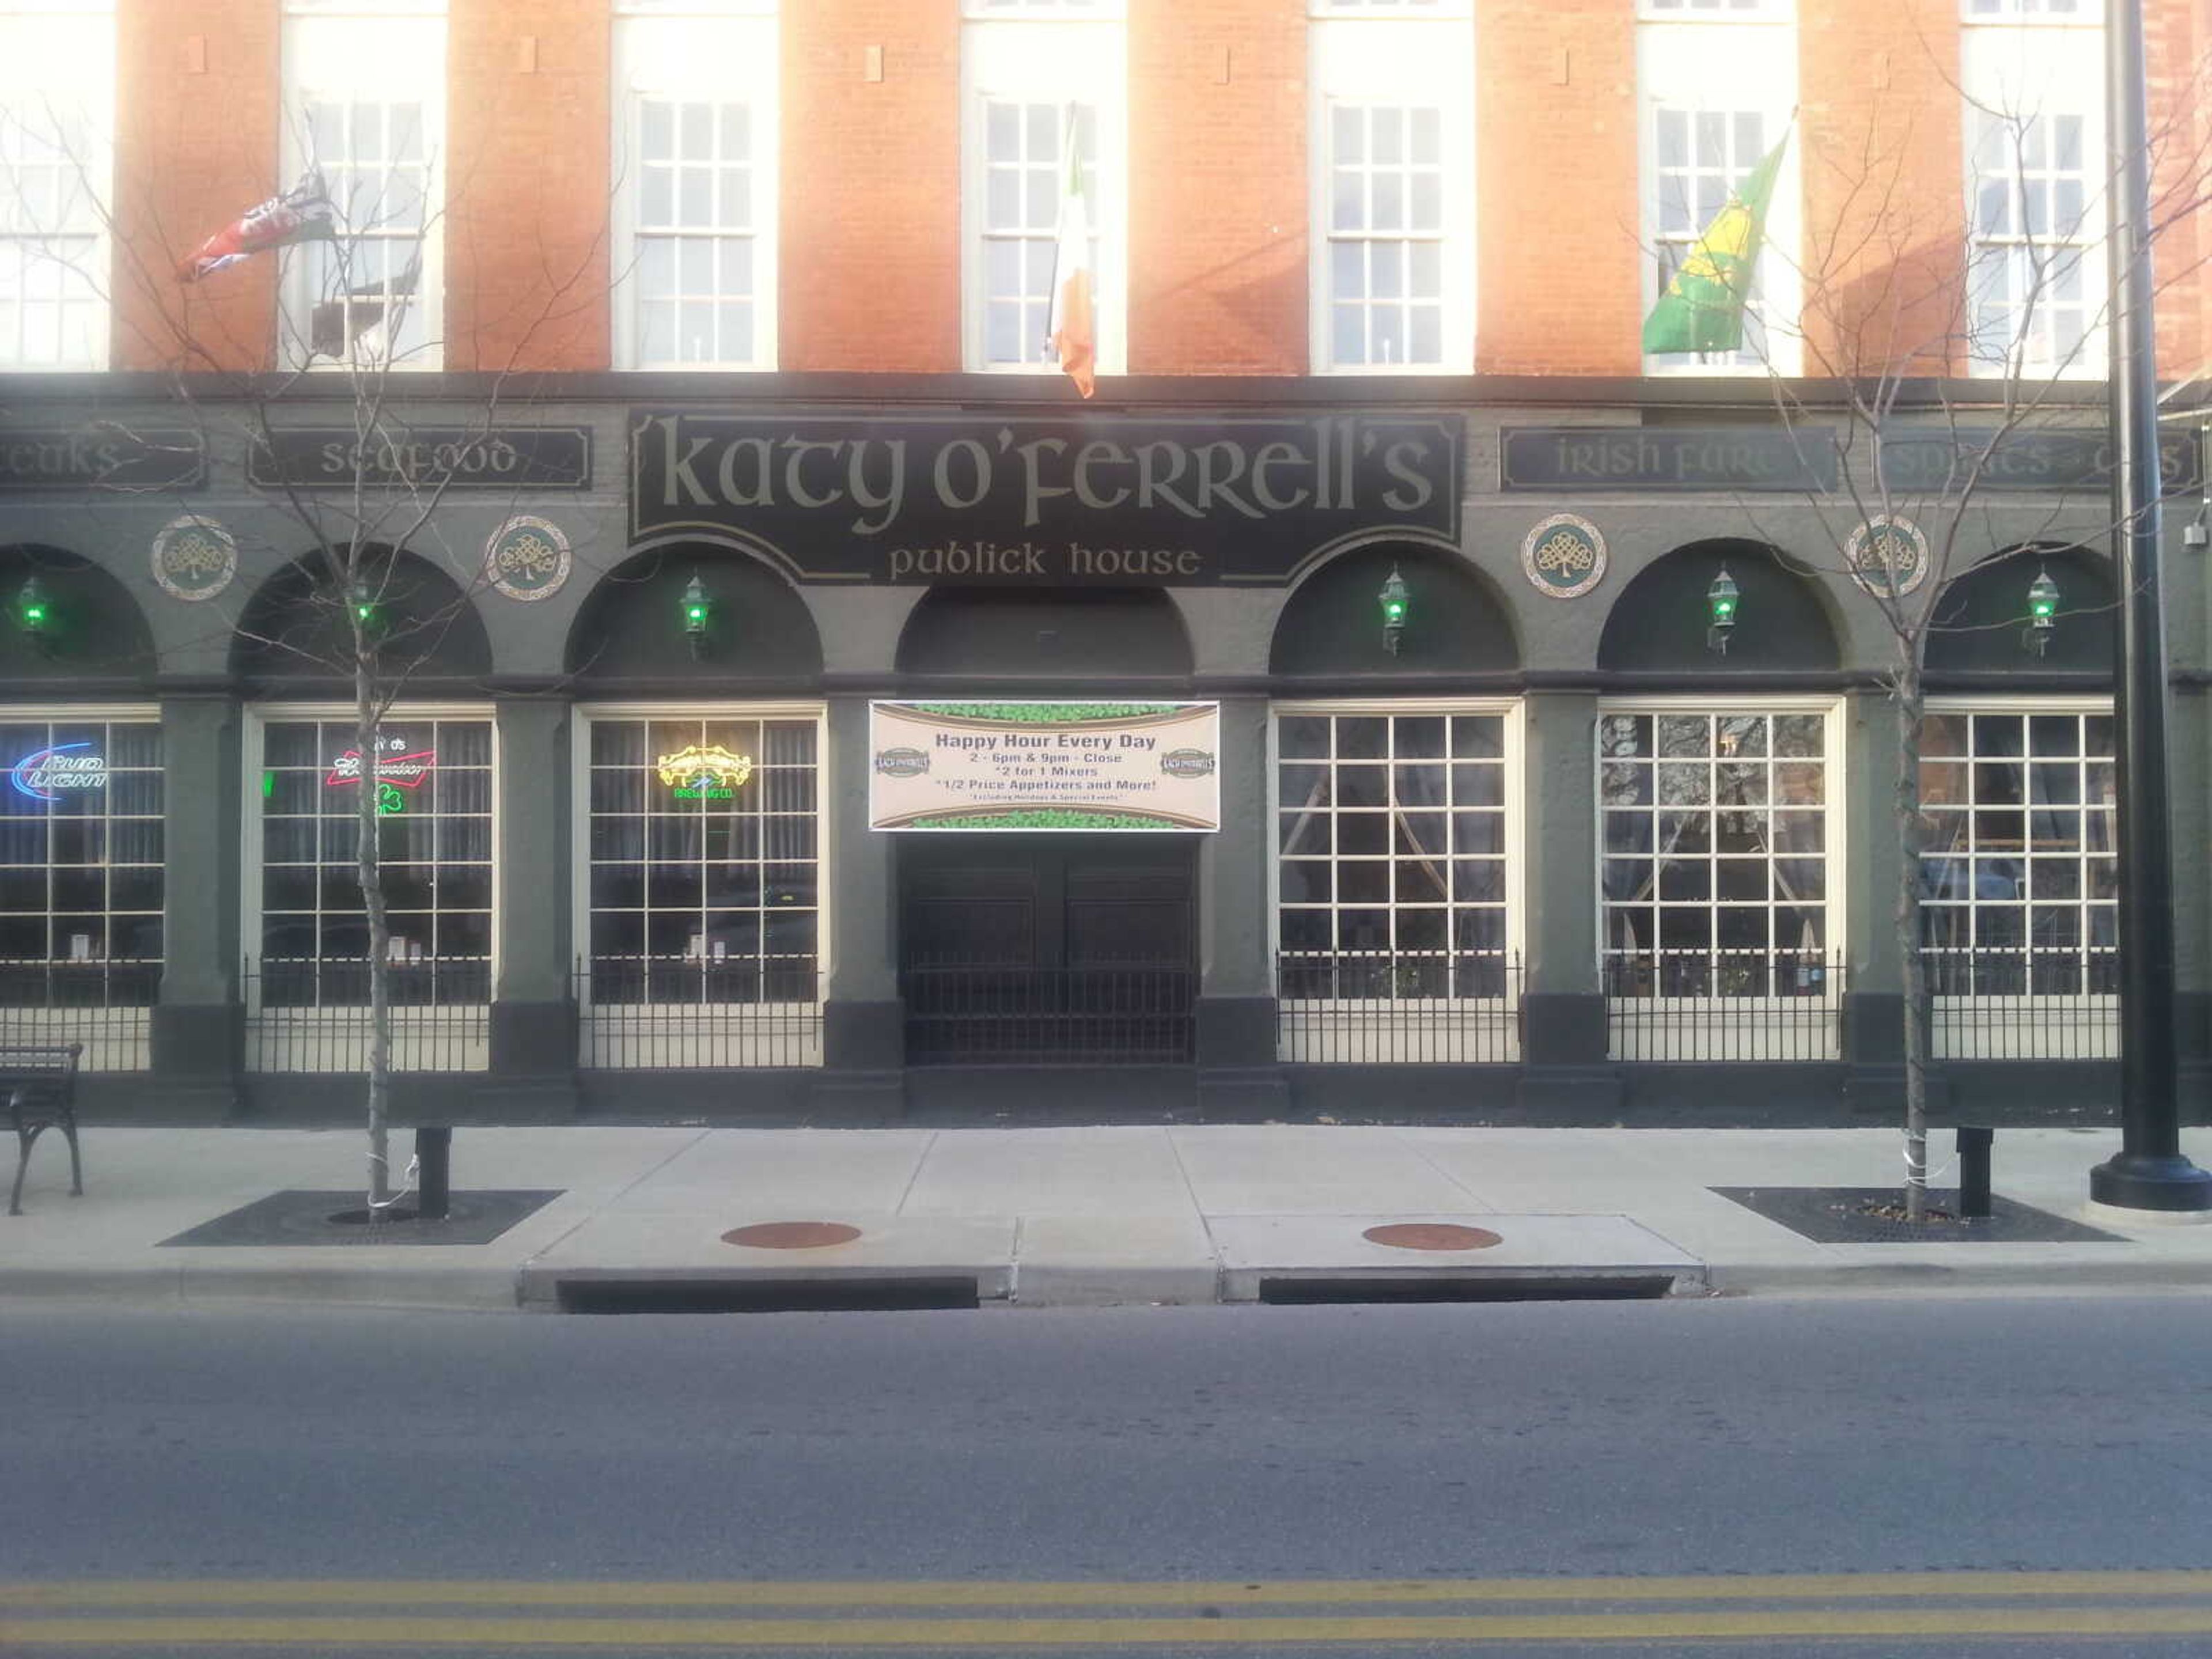 The street view of Katy O'Ferrell's Public House in Historic Downtown Cape Girardeau off of Broadway Street.